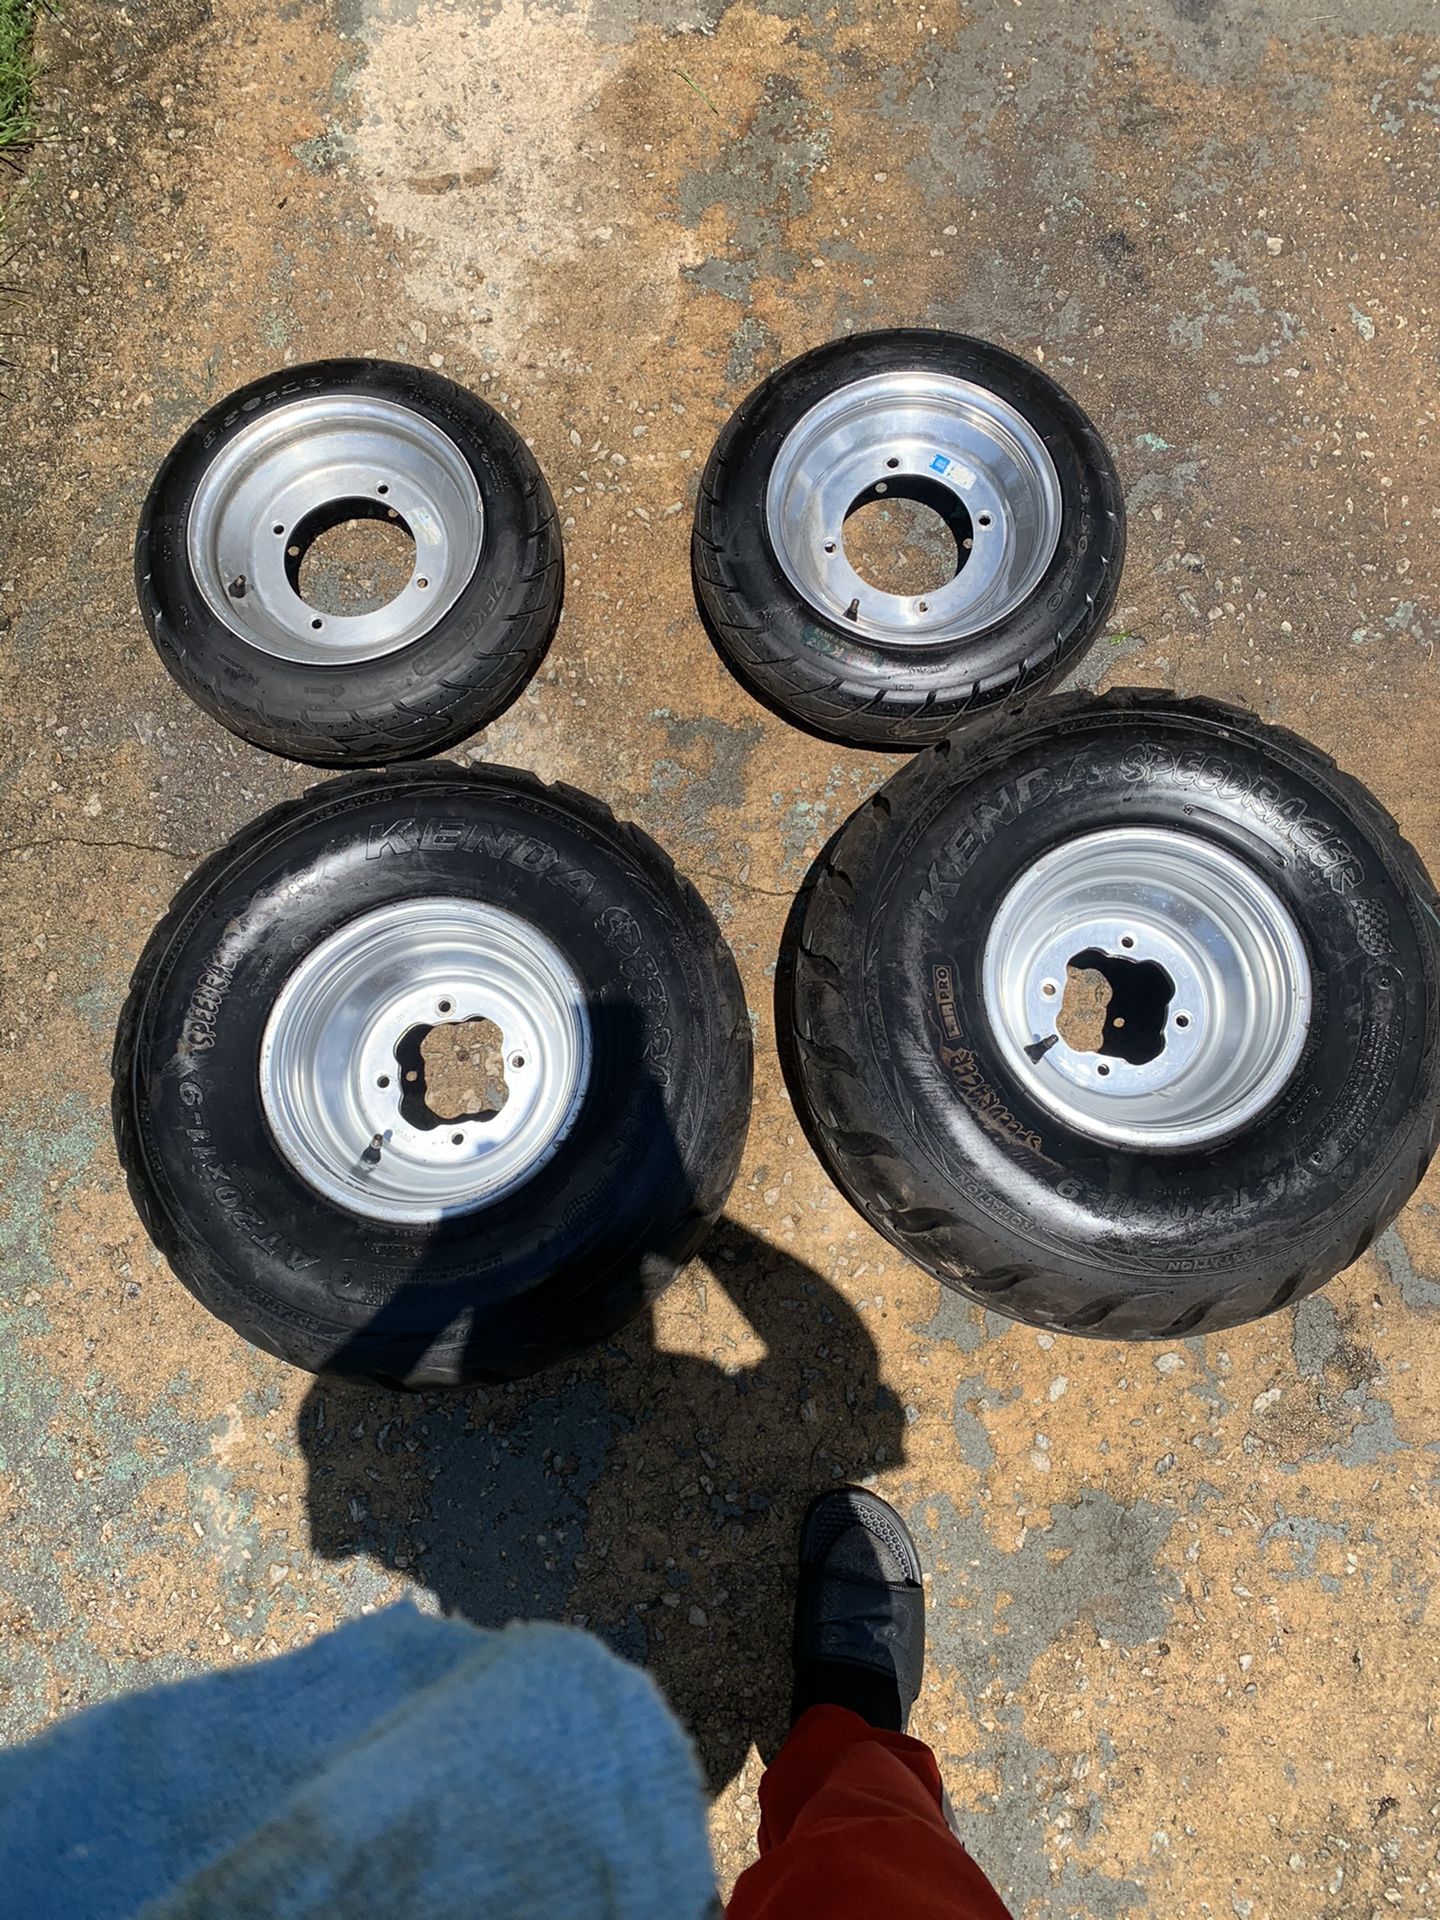 Atv wheels and tires